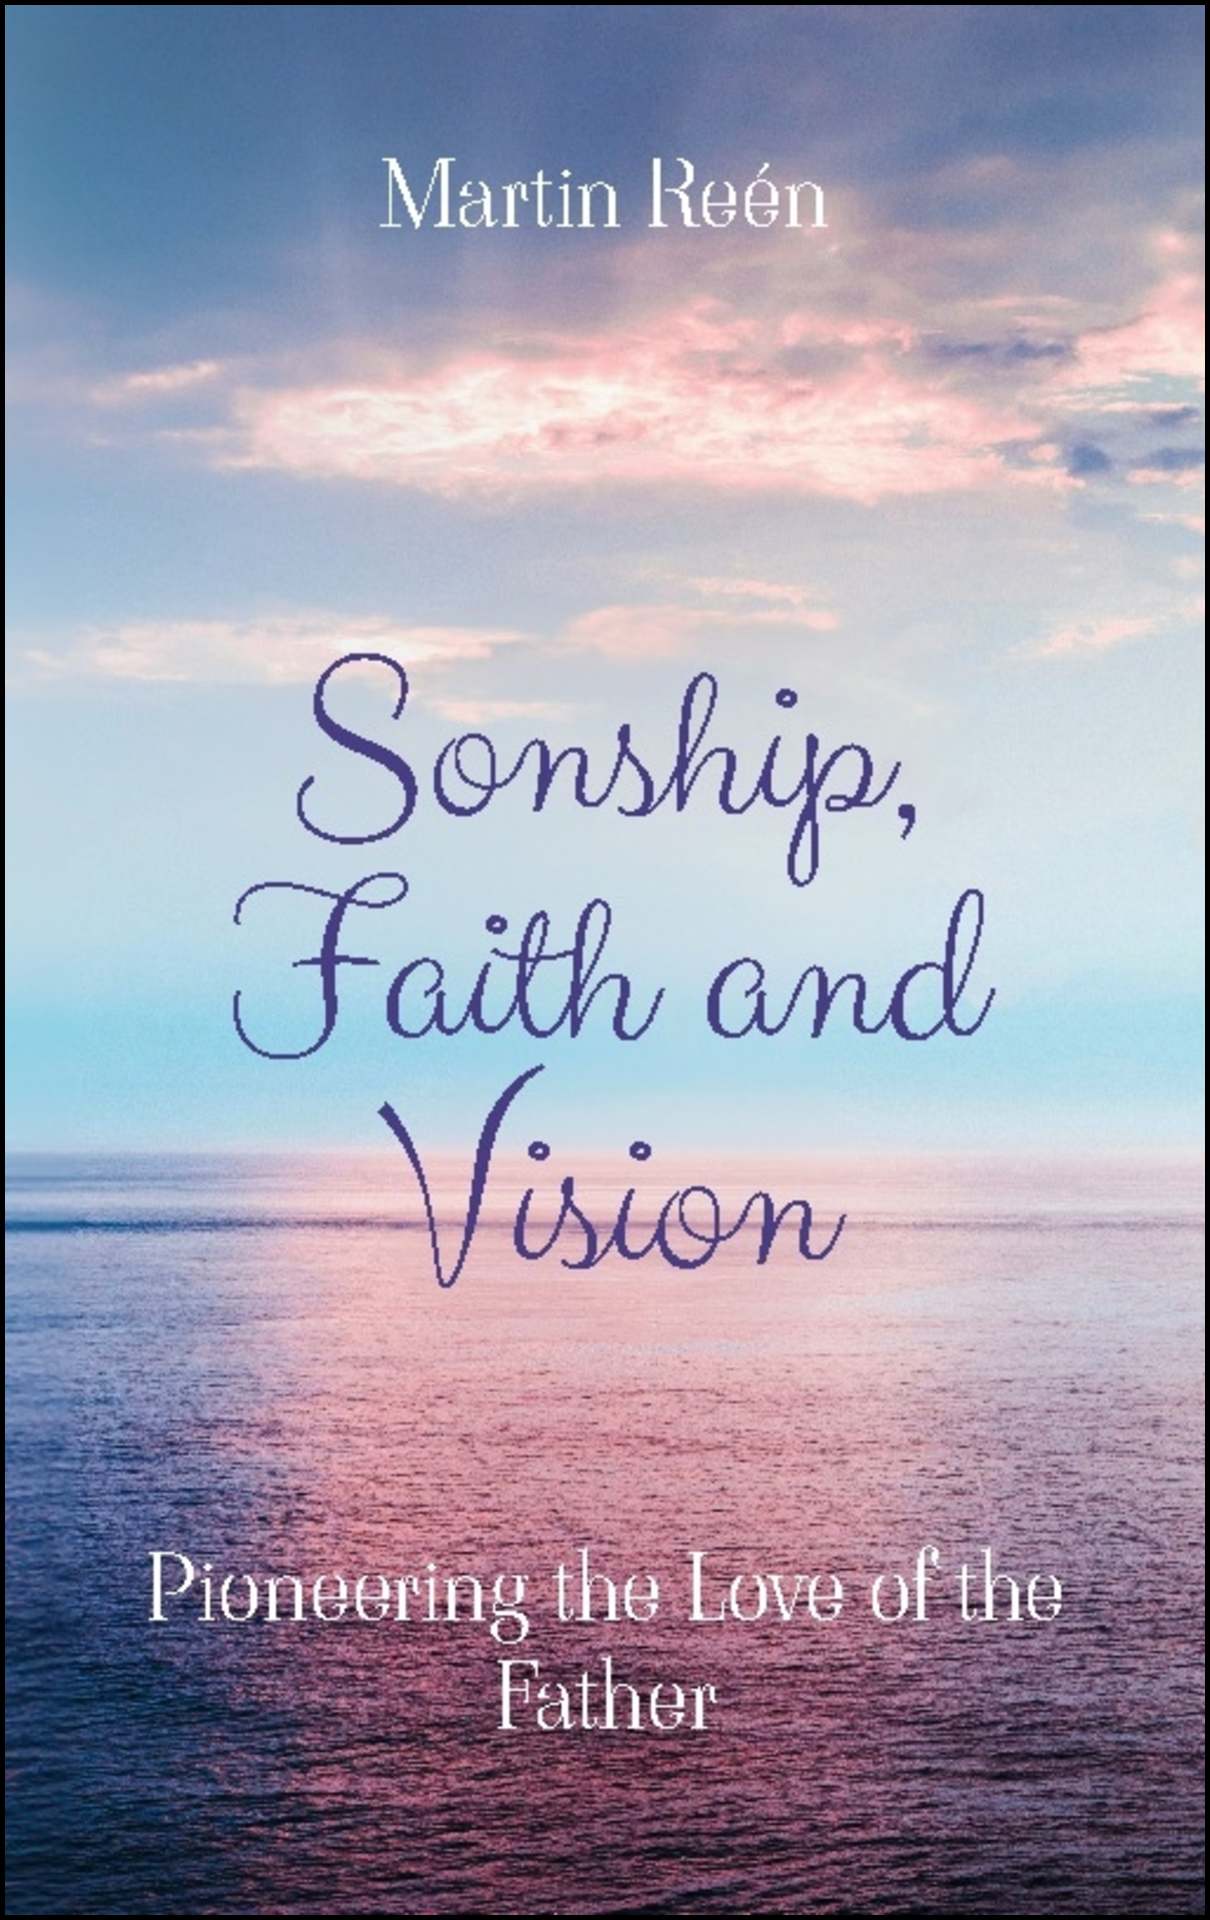 Reén, Martin | Sonship, Faith and Vision : Pioneering the Love of the Father